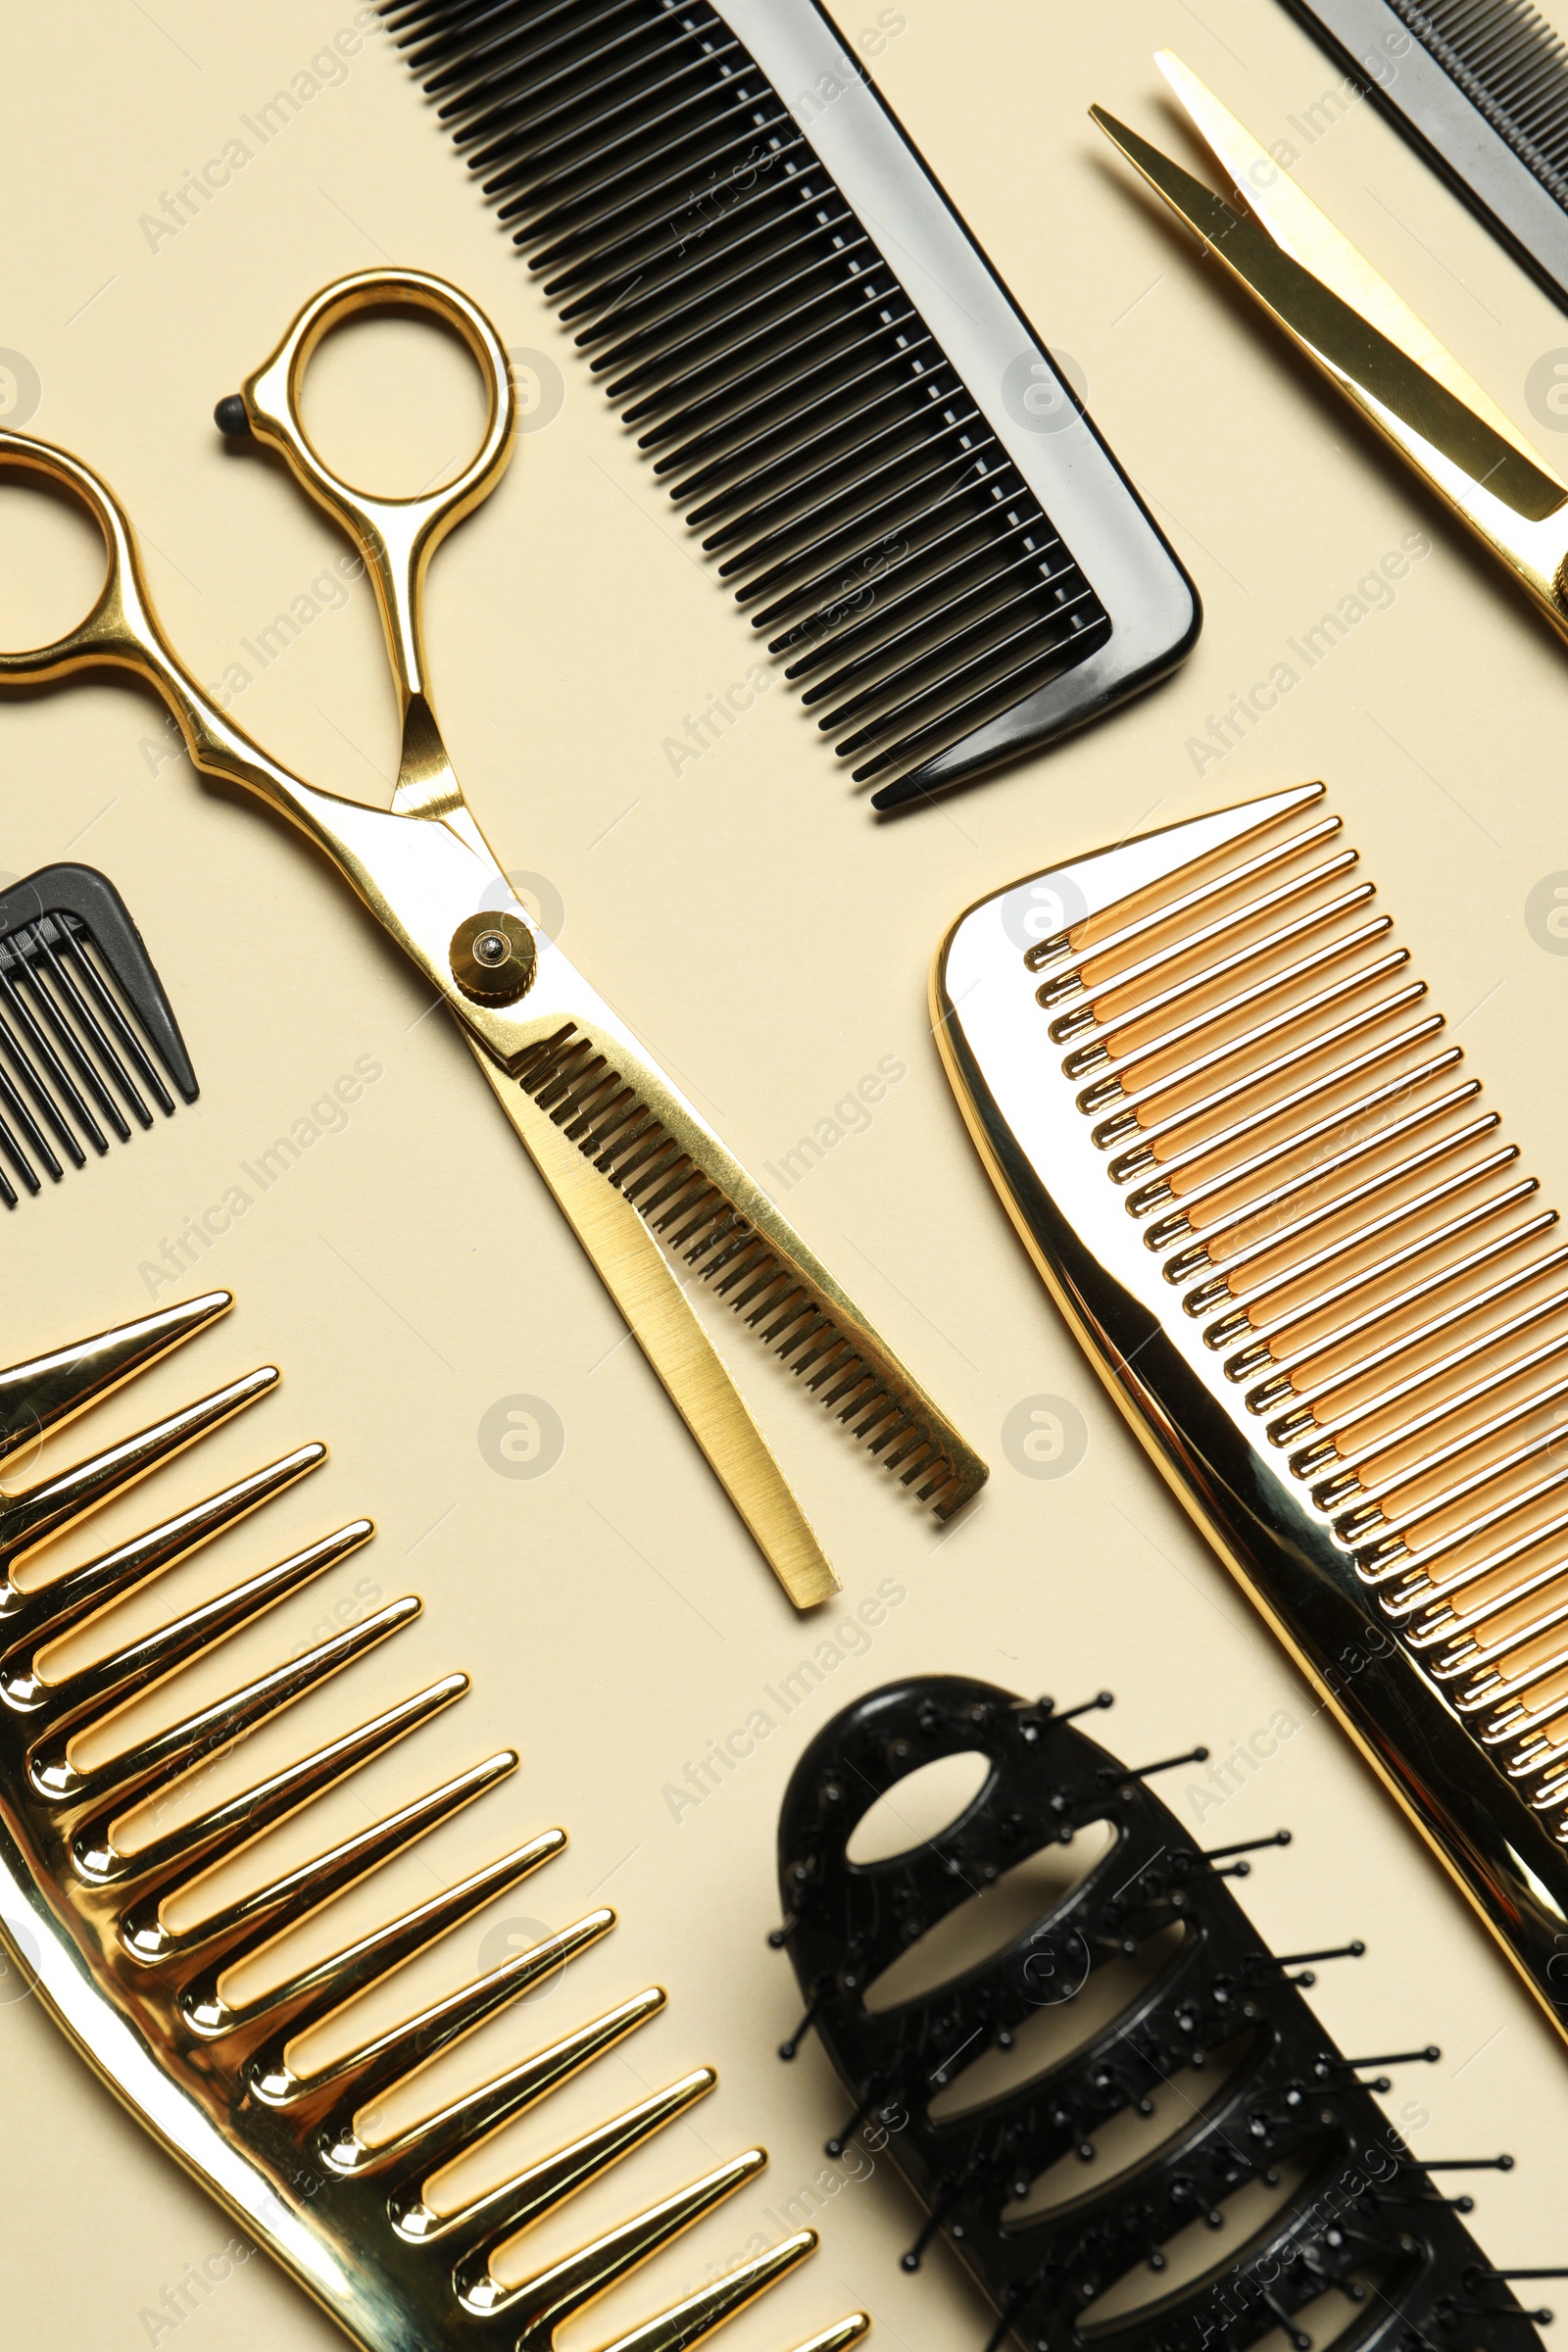 Photo of Hairdressing tools on beige background, flat lay